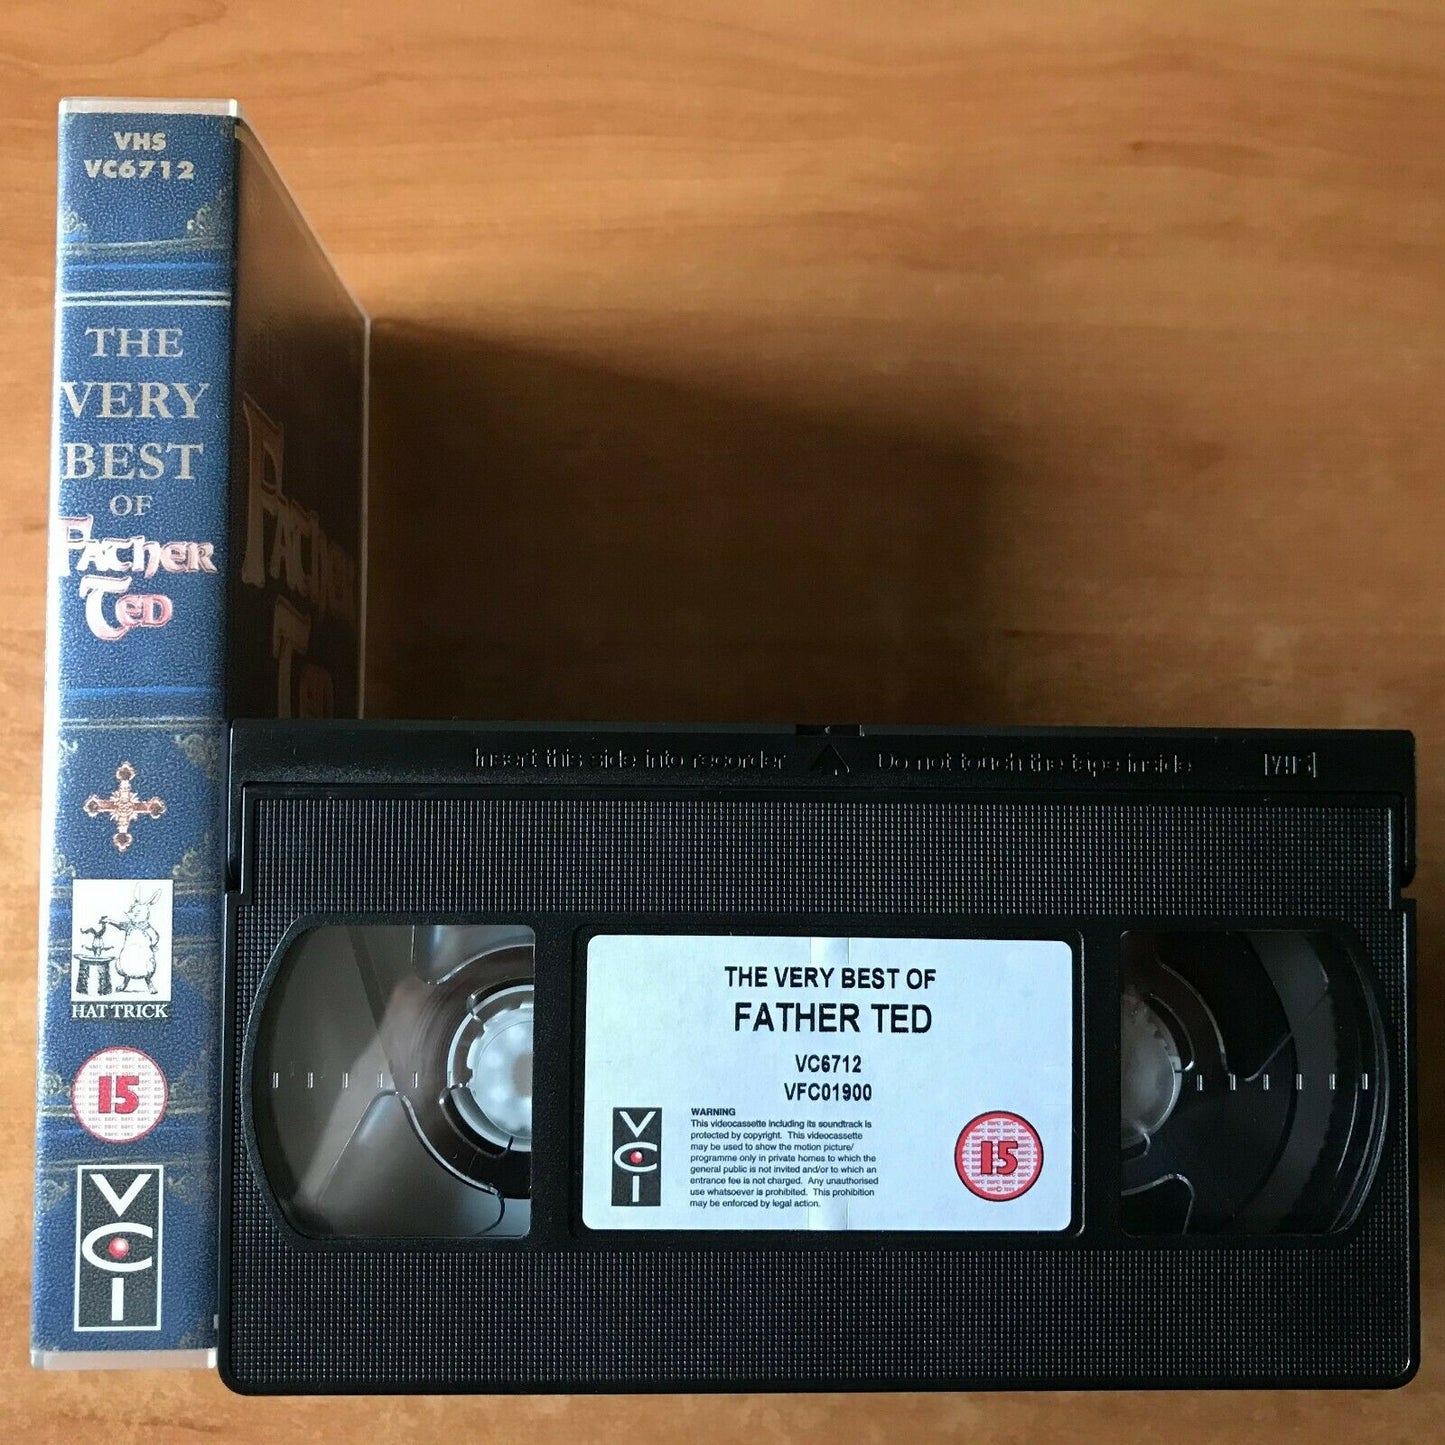 The Very Best Of Father Ted: Competition Time [TV Series] Dermont Morgan - VHS-